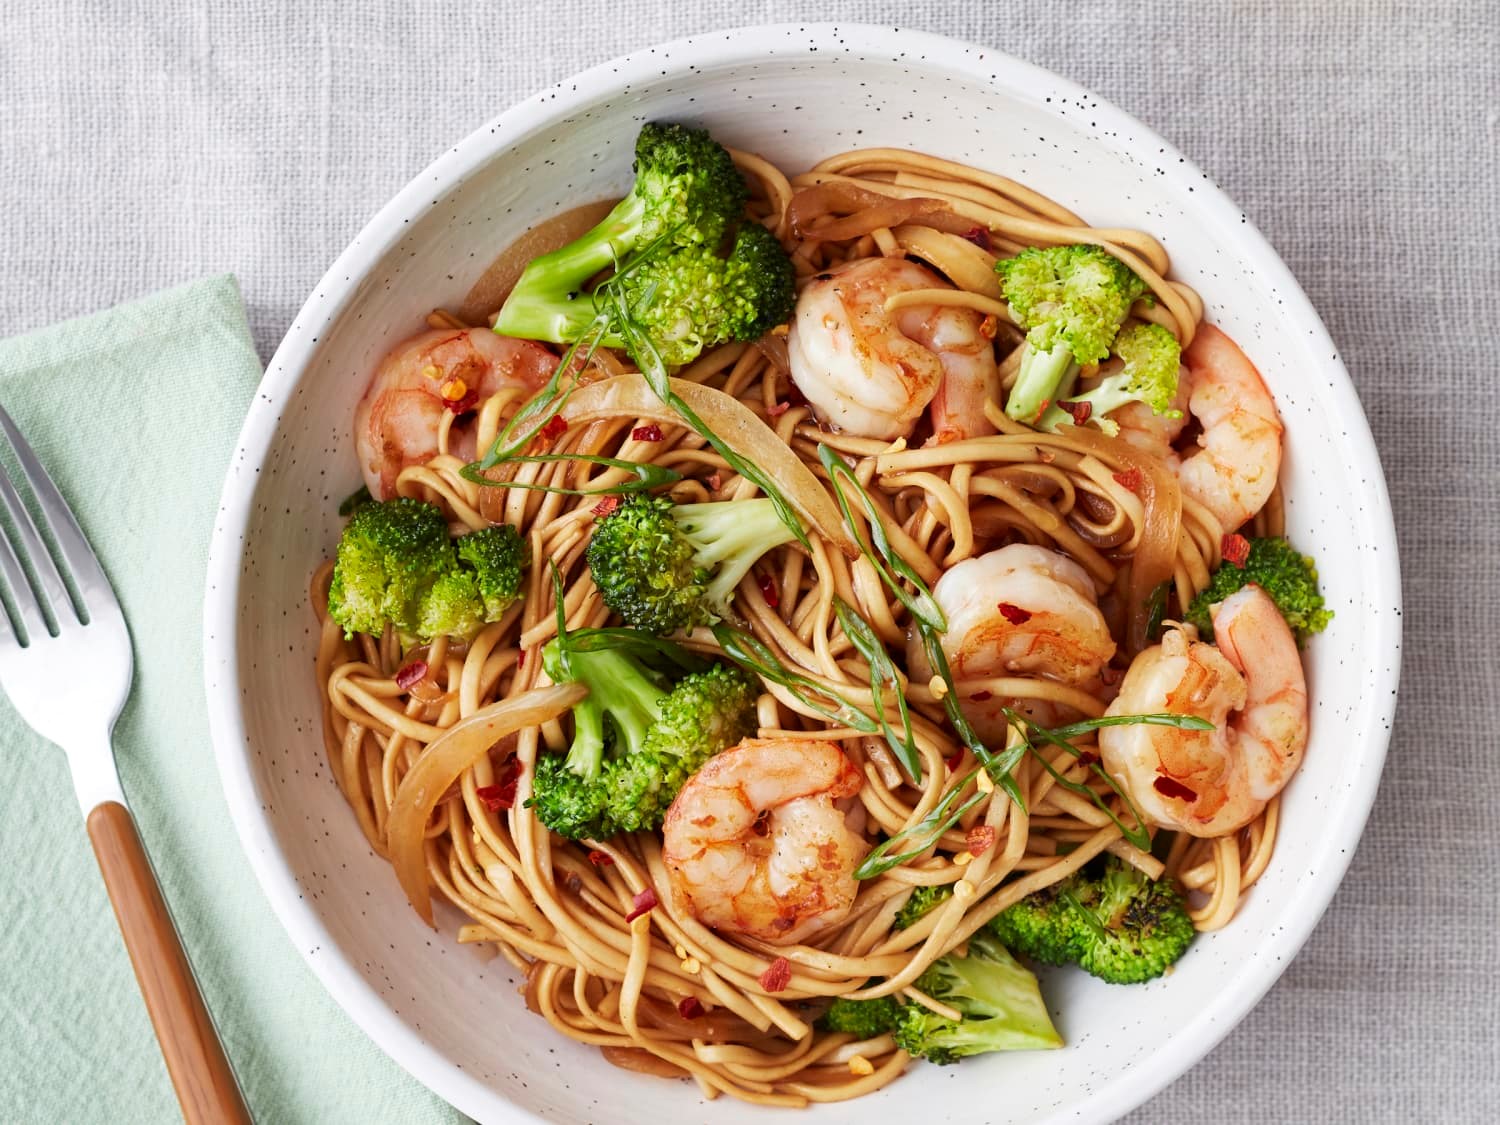 Shrimp and Lo Mein in white bowl